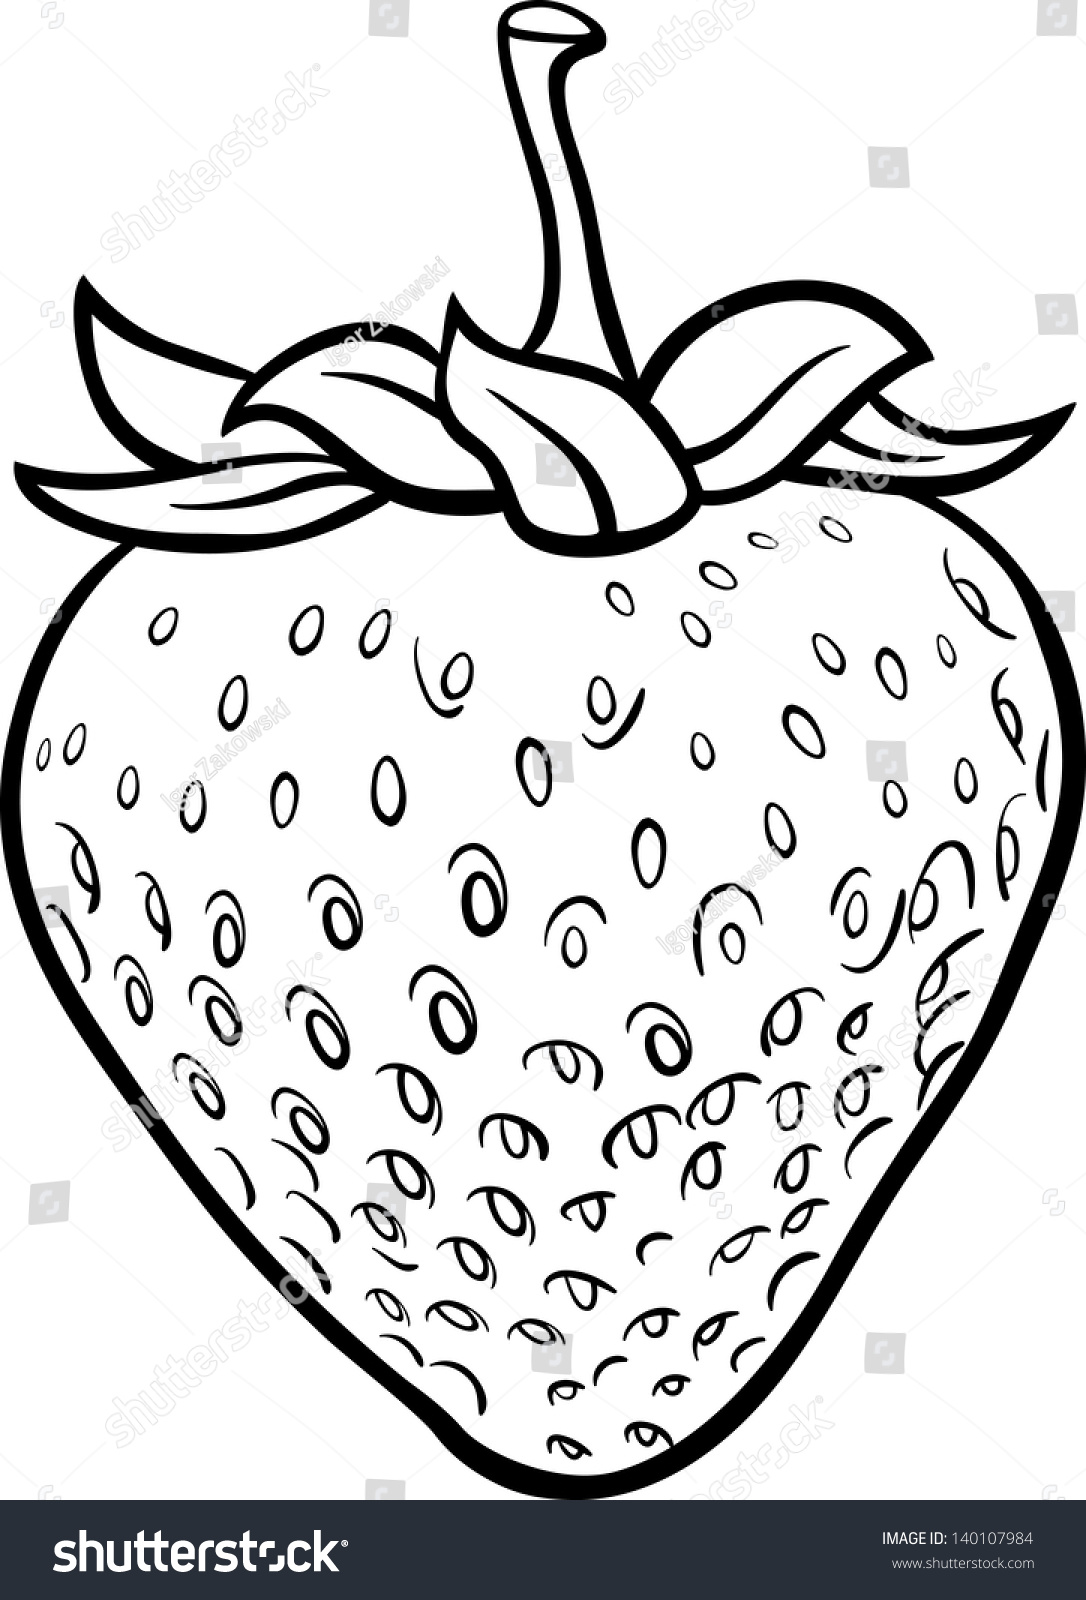 Black And White Cartoon Vector Illustration Of Strawberry